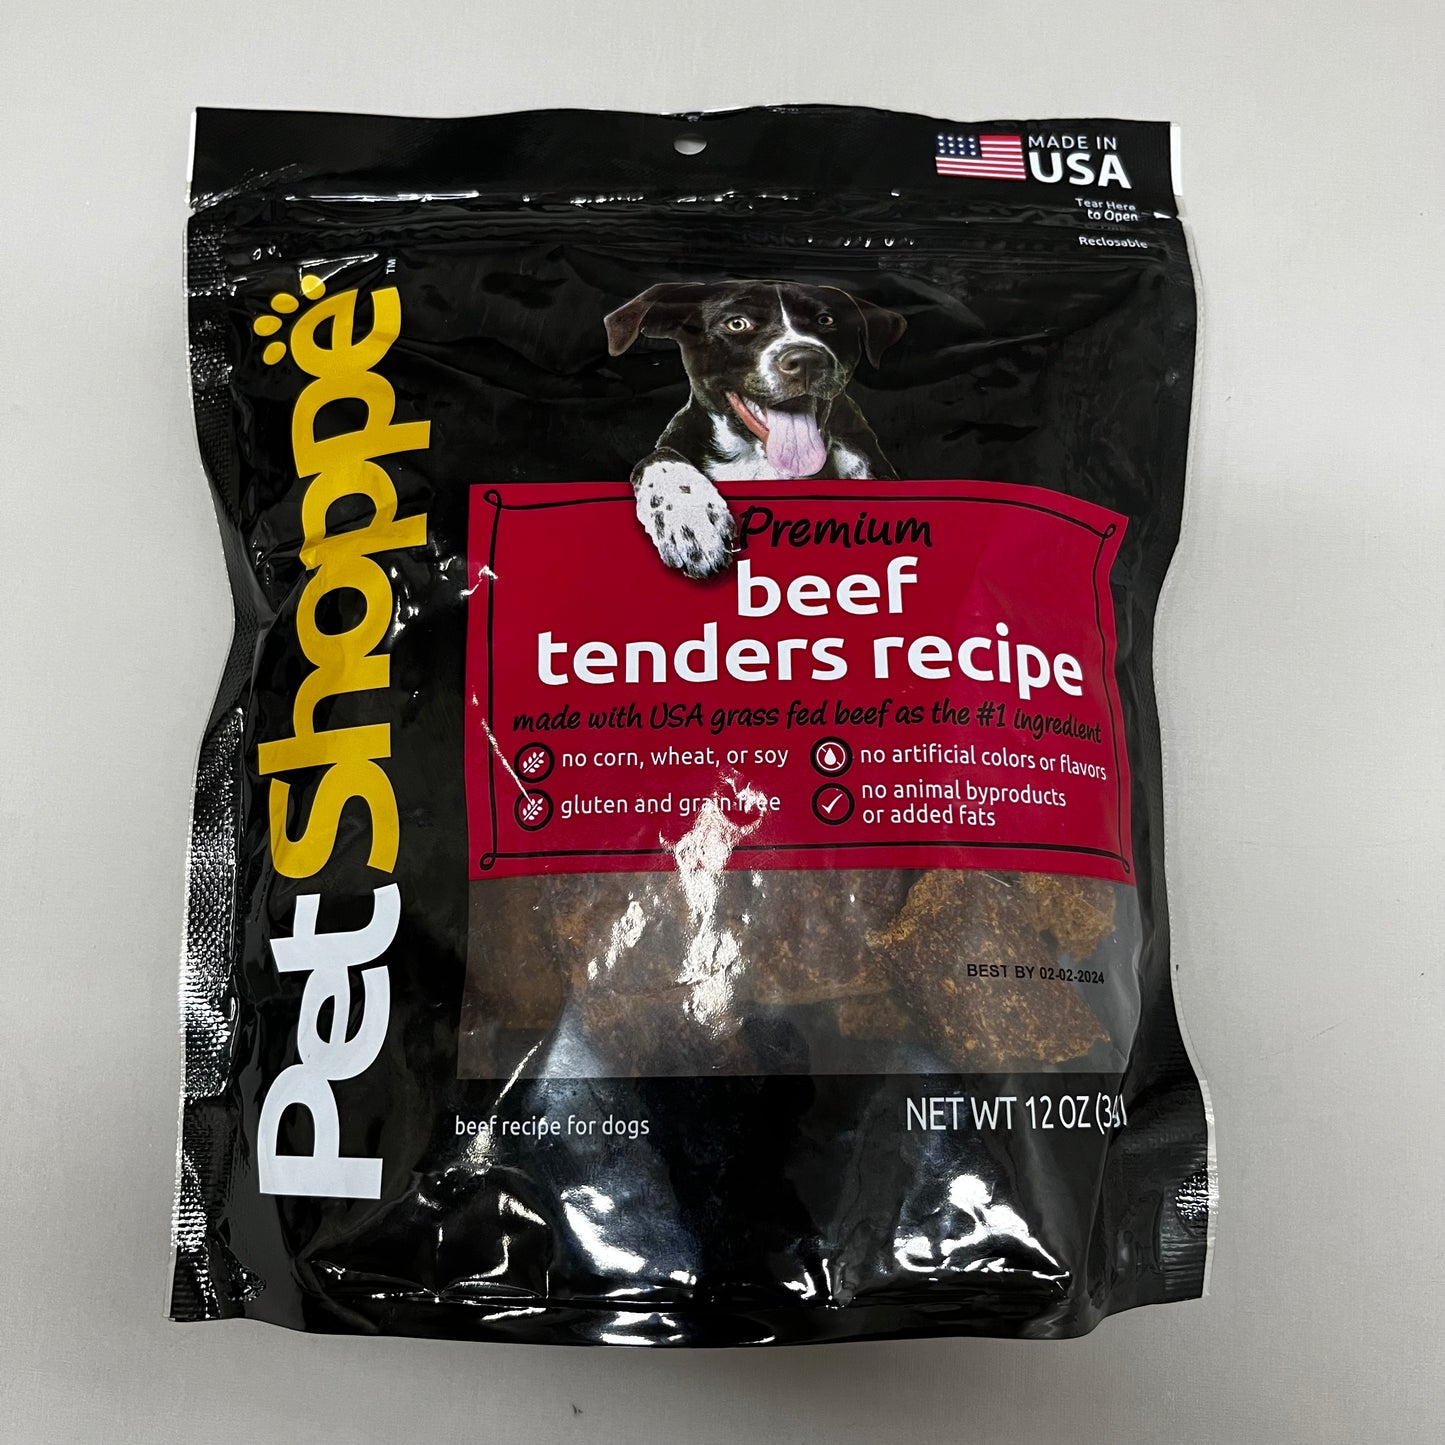 PETSHOPPE Premium Beef Tenders Dog Treats Made in USA All Natural 12 oz 02/24 (New)